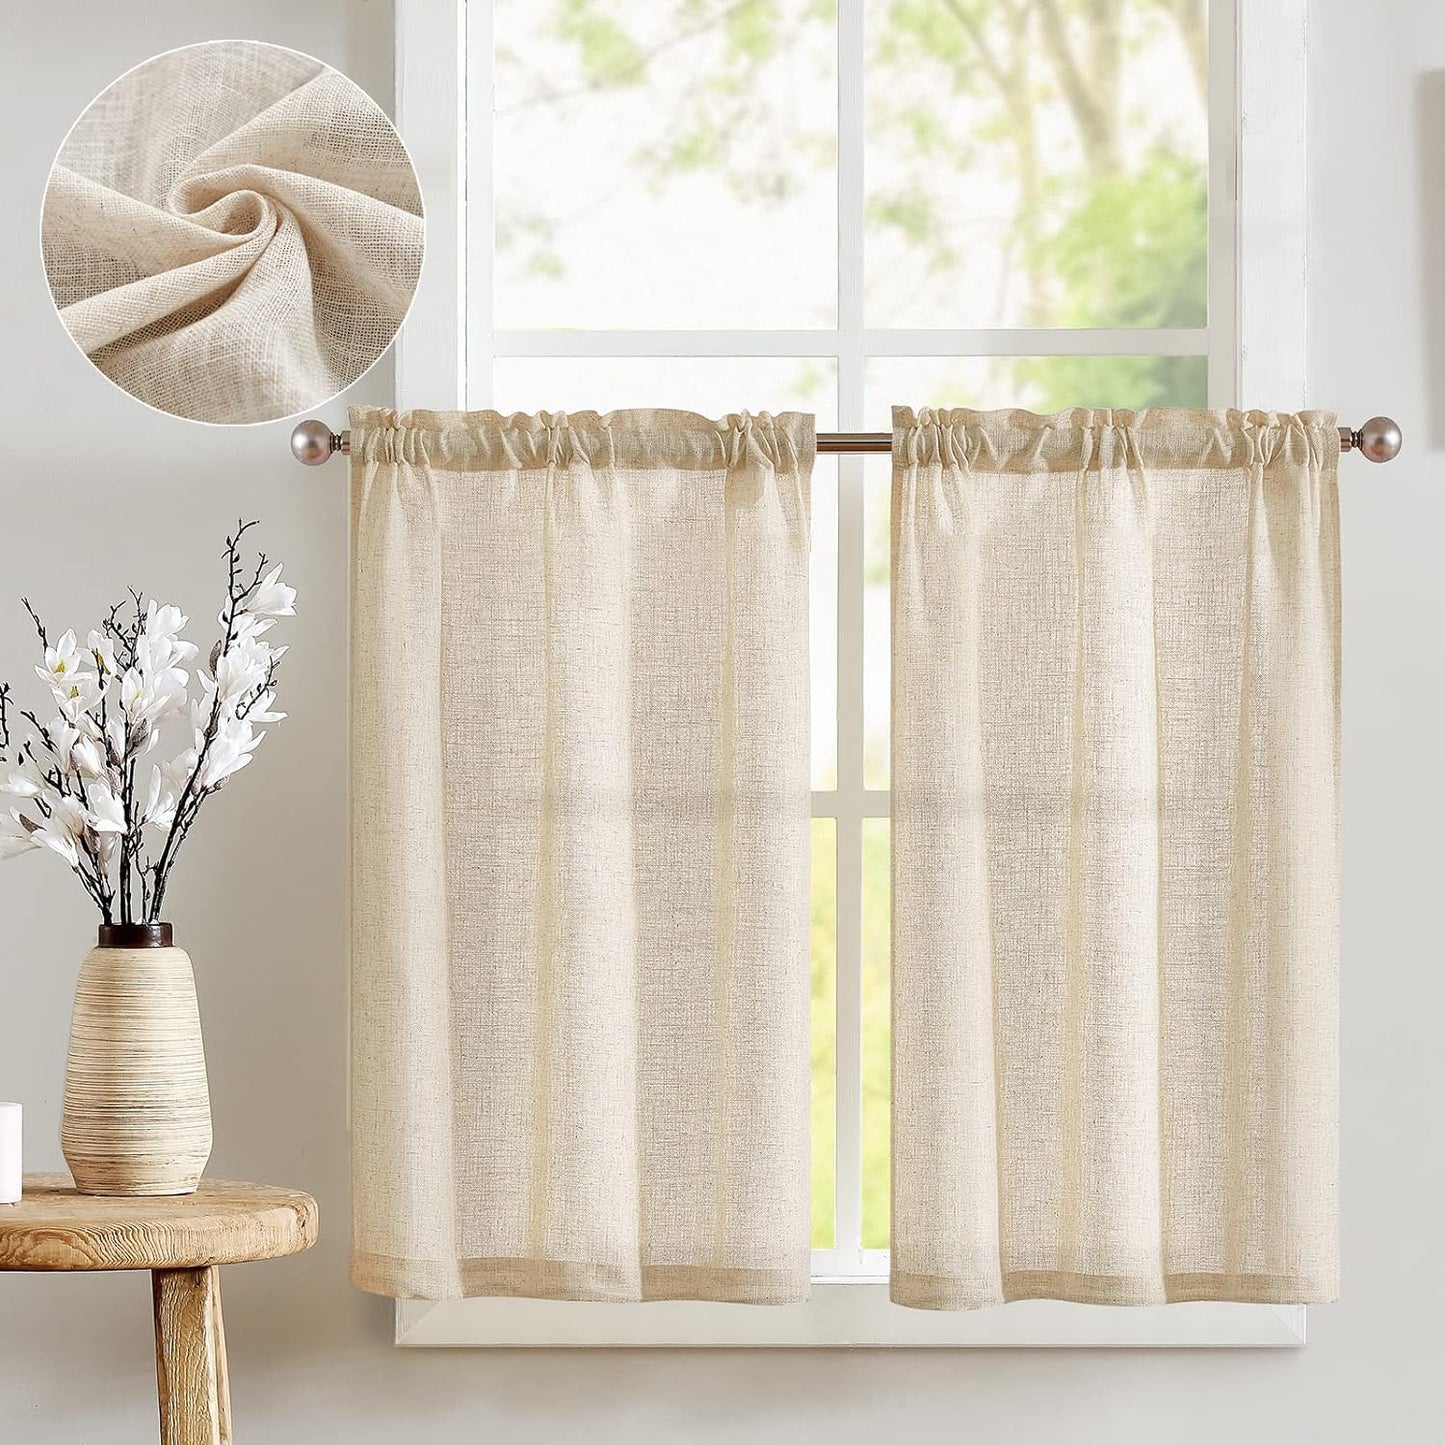 Jinchan Linen Kitchen Curtains Striped Tier Curtains Ticking Stripe Curtains Pinstripe Cafe Curtains 24 Inch Length for Living Room Bathroom Farmhouse Rustic Curtains Rod Pocket 2 Panels Tan  CKNY HOME FASHION Thick Linen Crude W26 X L24 